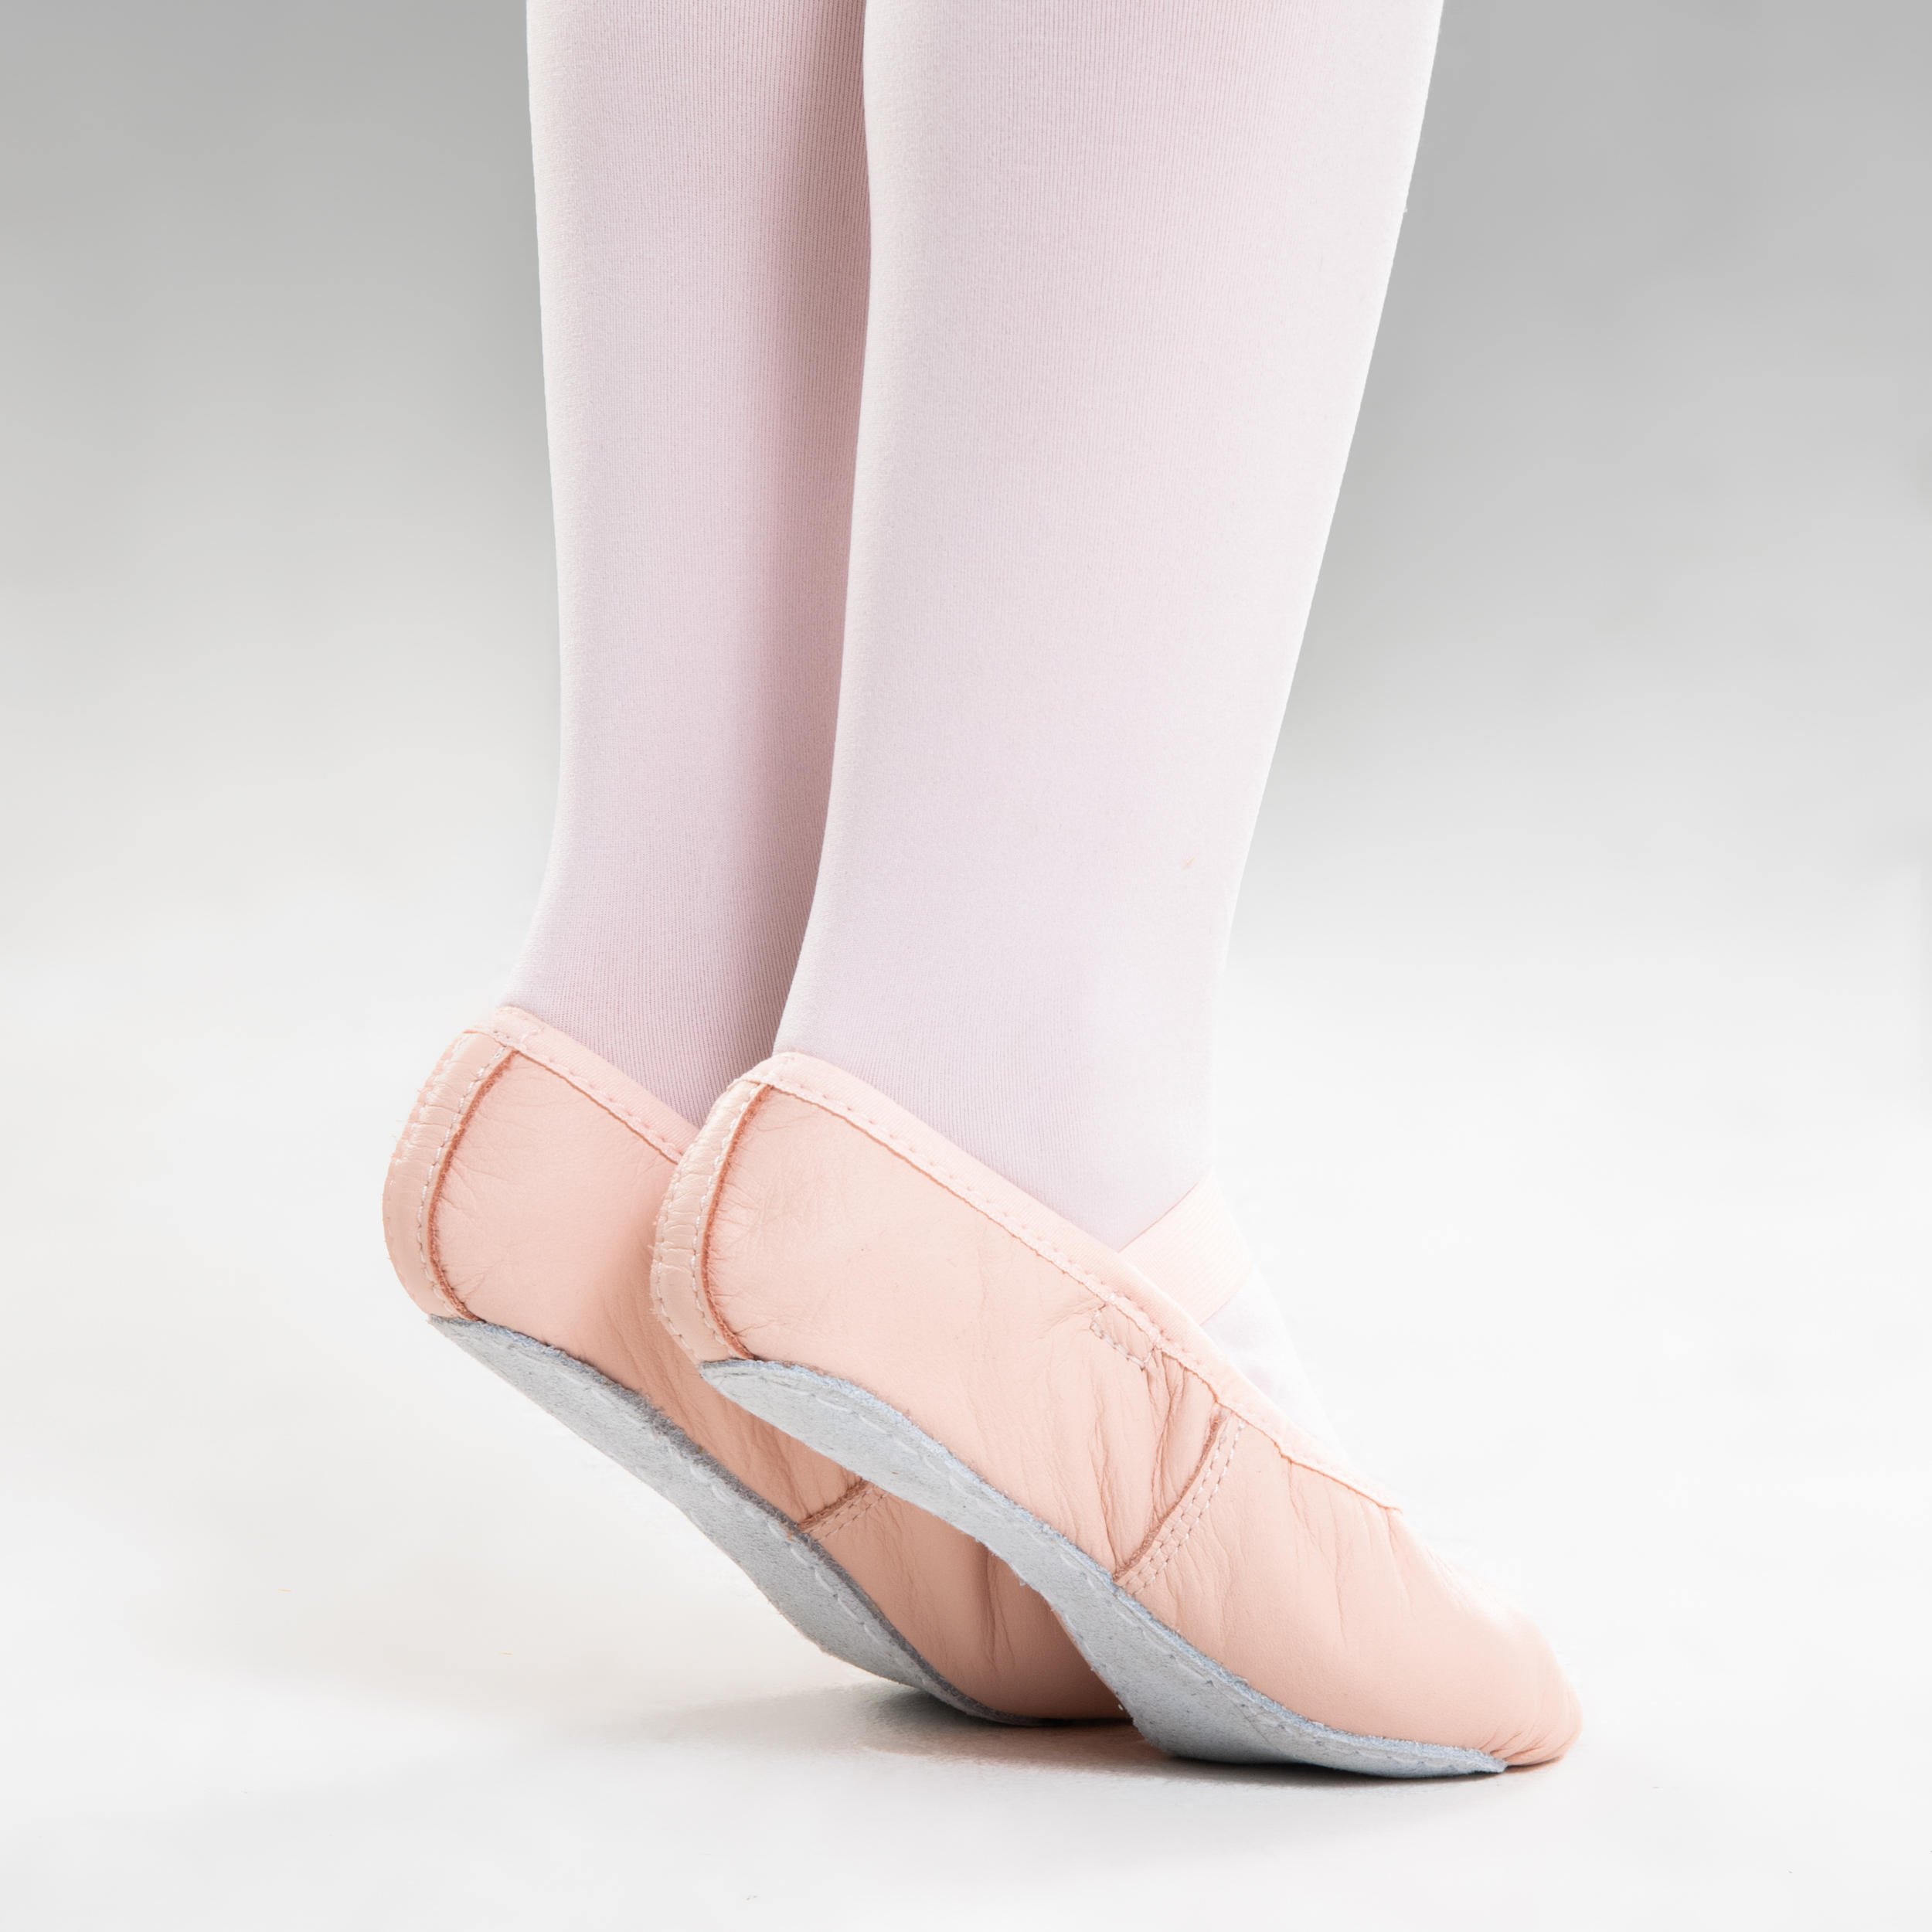 Beginner Ballet Full Sole Leather Demi-Pointe Shoes - Pink 4/5